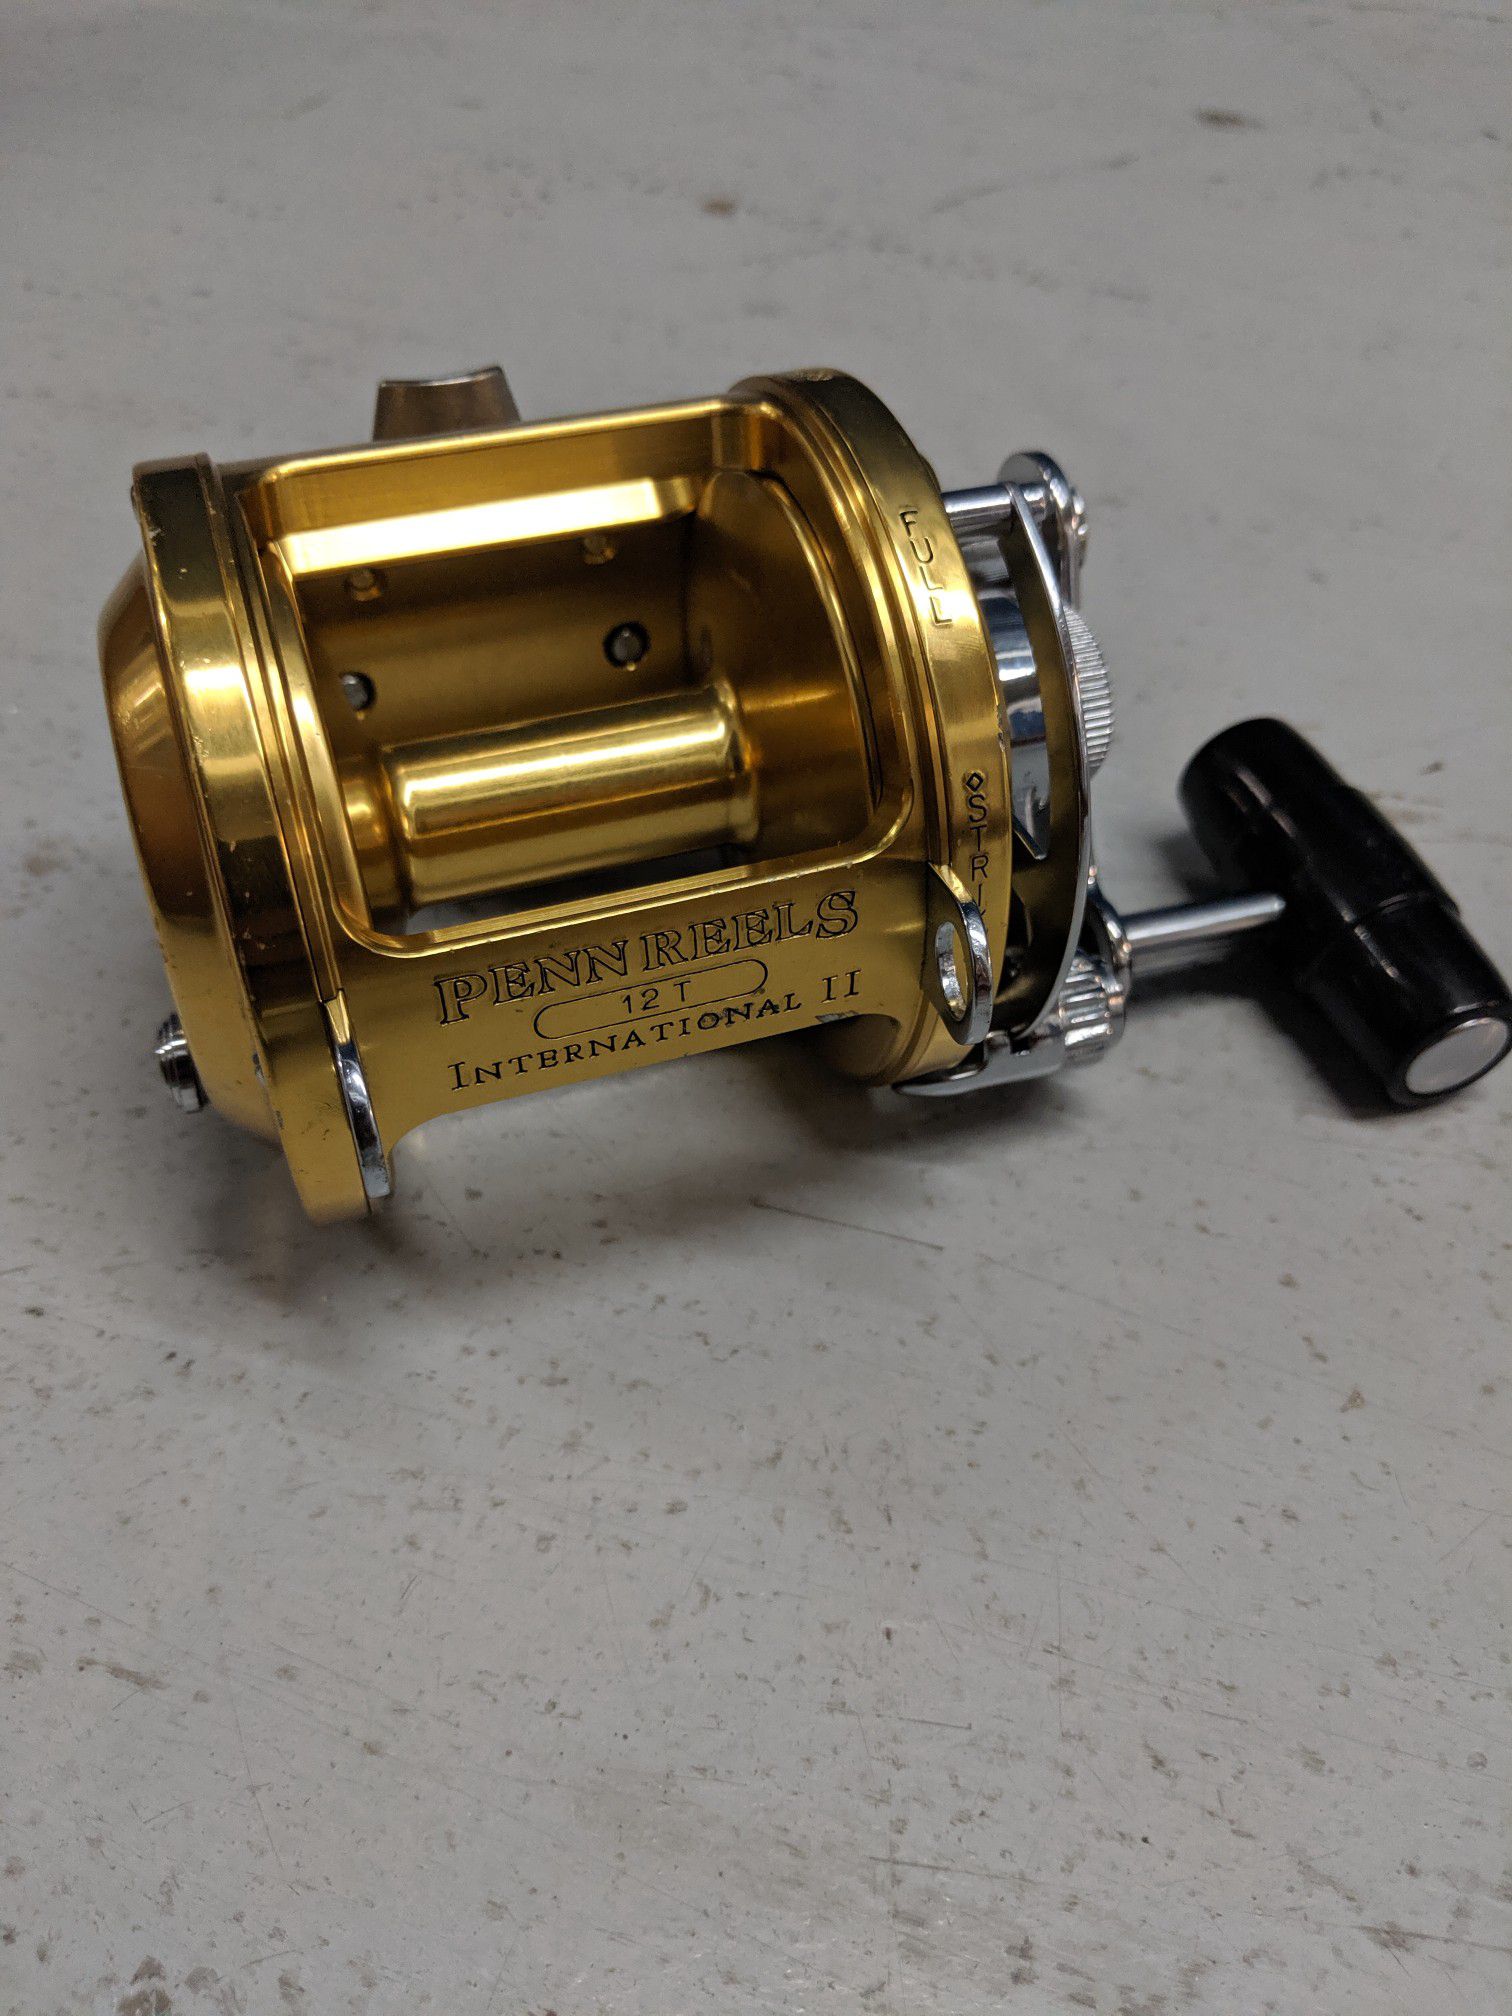 Serviced Penn International II 12T Conventional Reel. Excellent Condition. Ready for fishing.